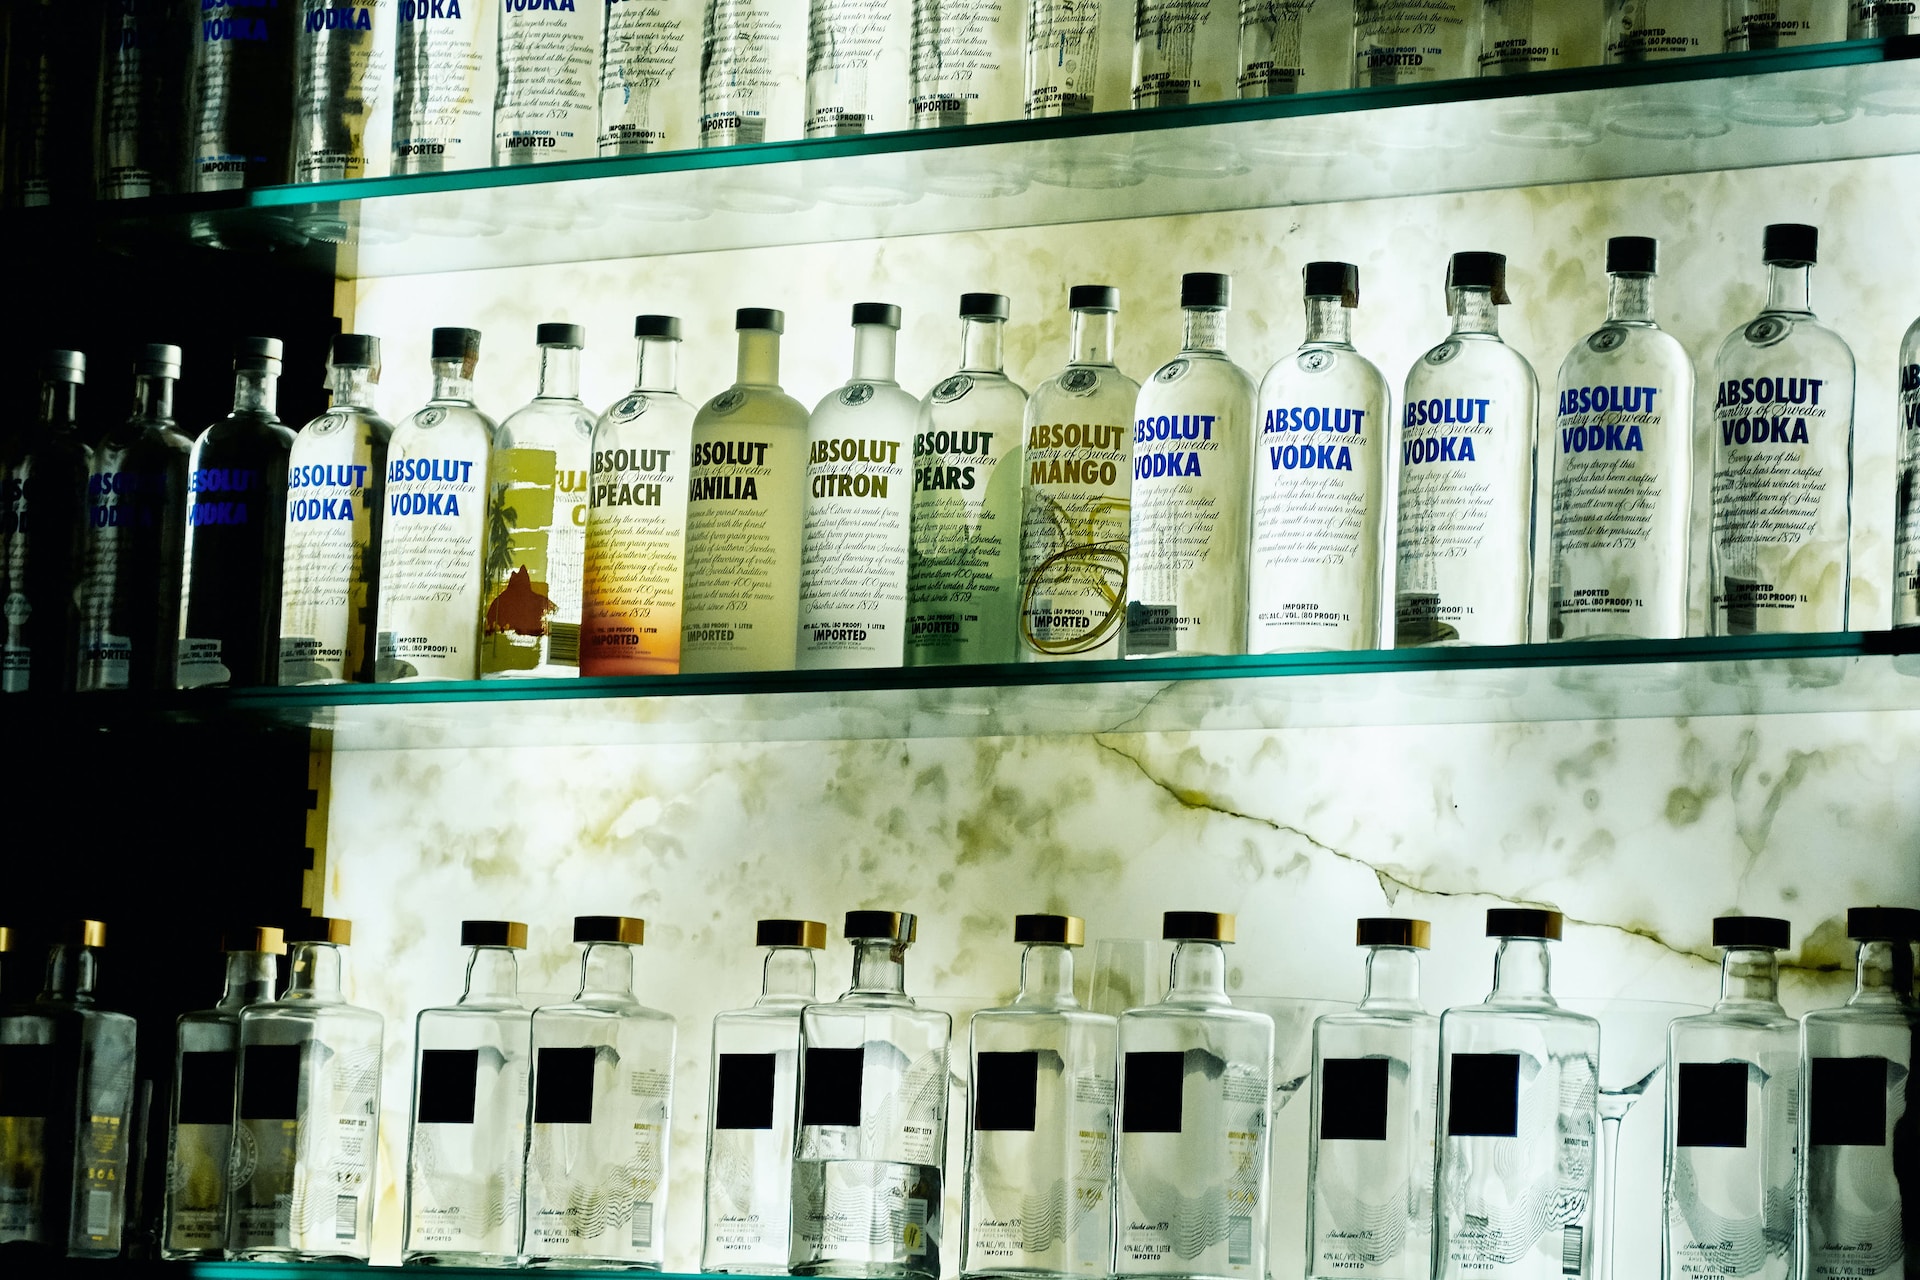 Every Absolut Vodka Flavor Ranked From Worst To Best